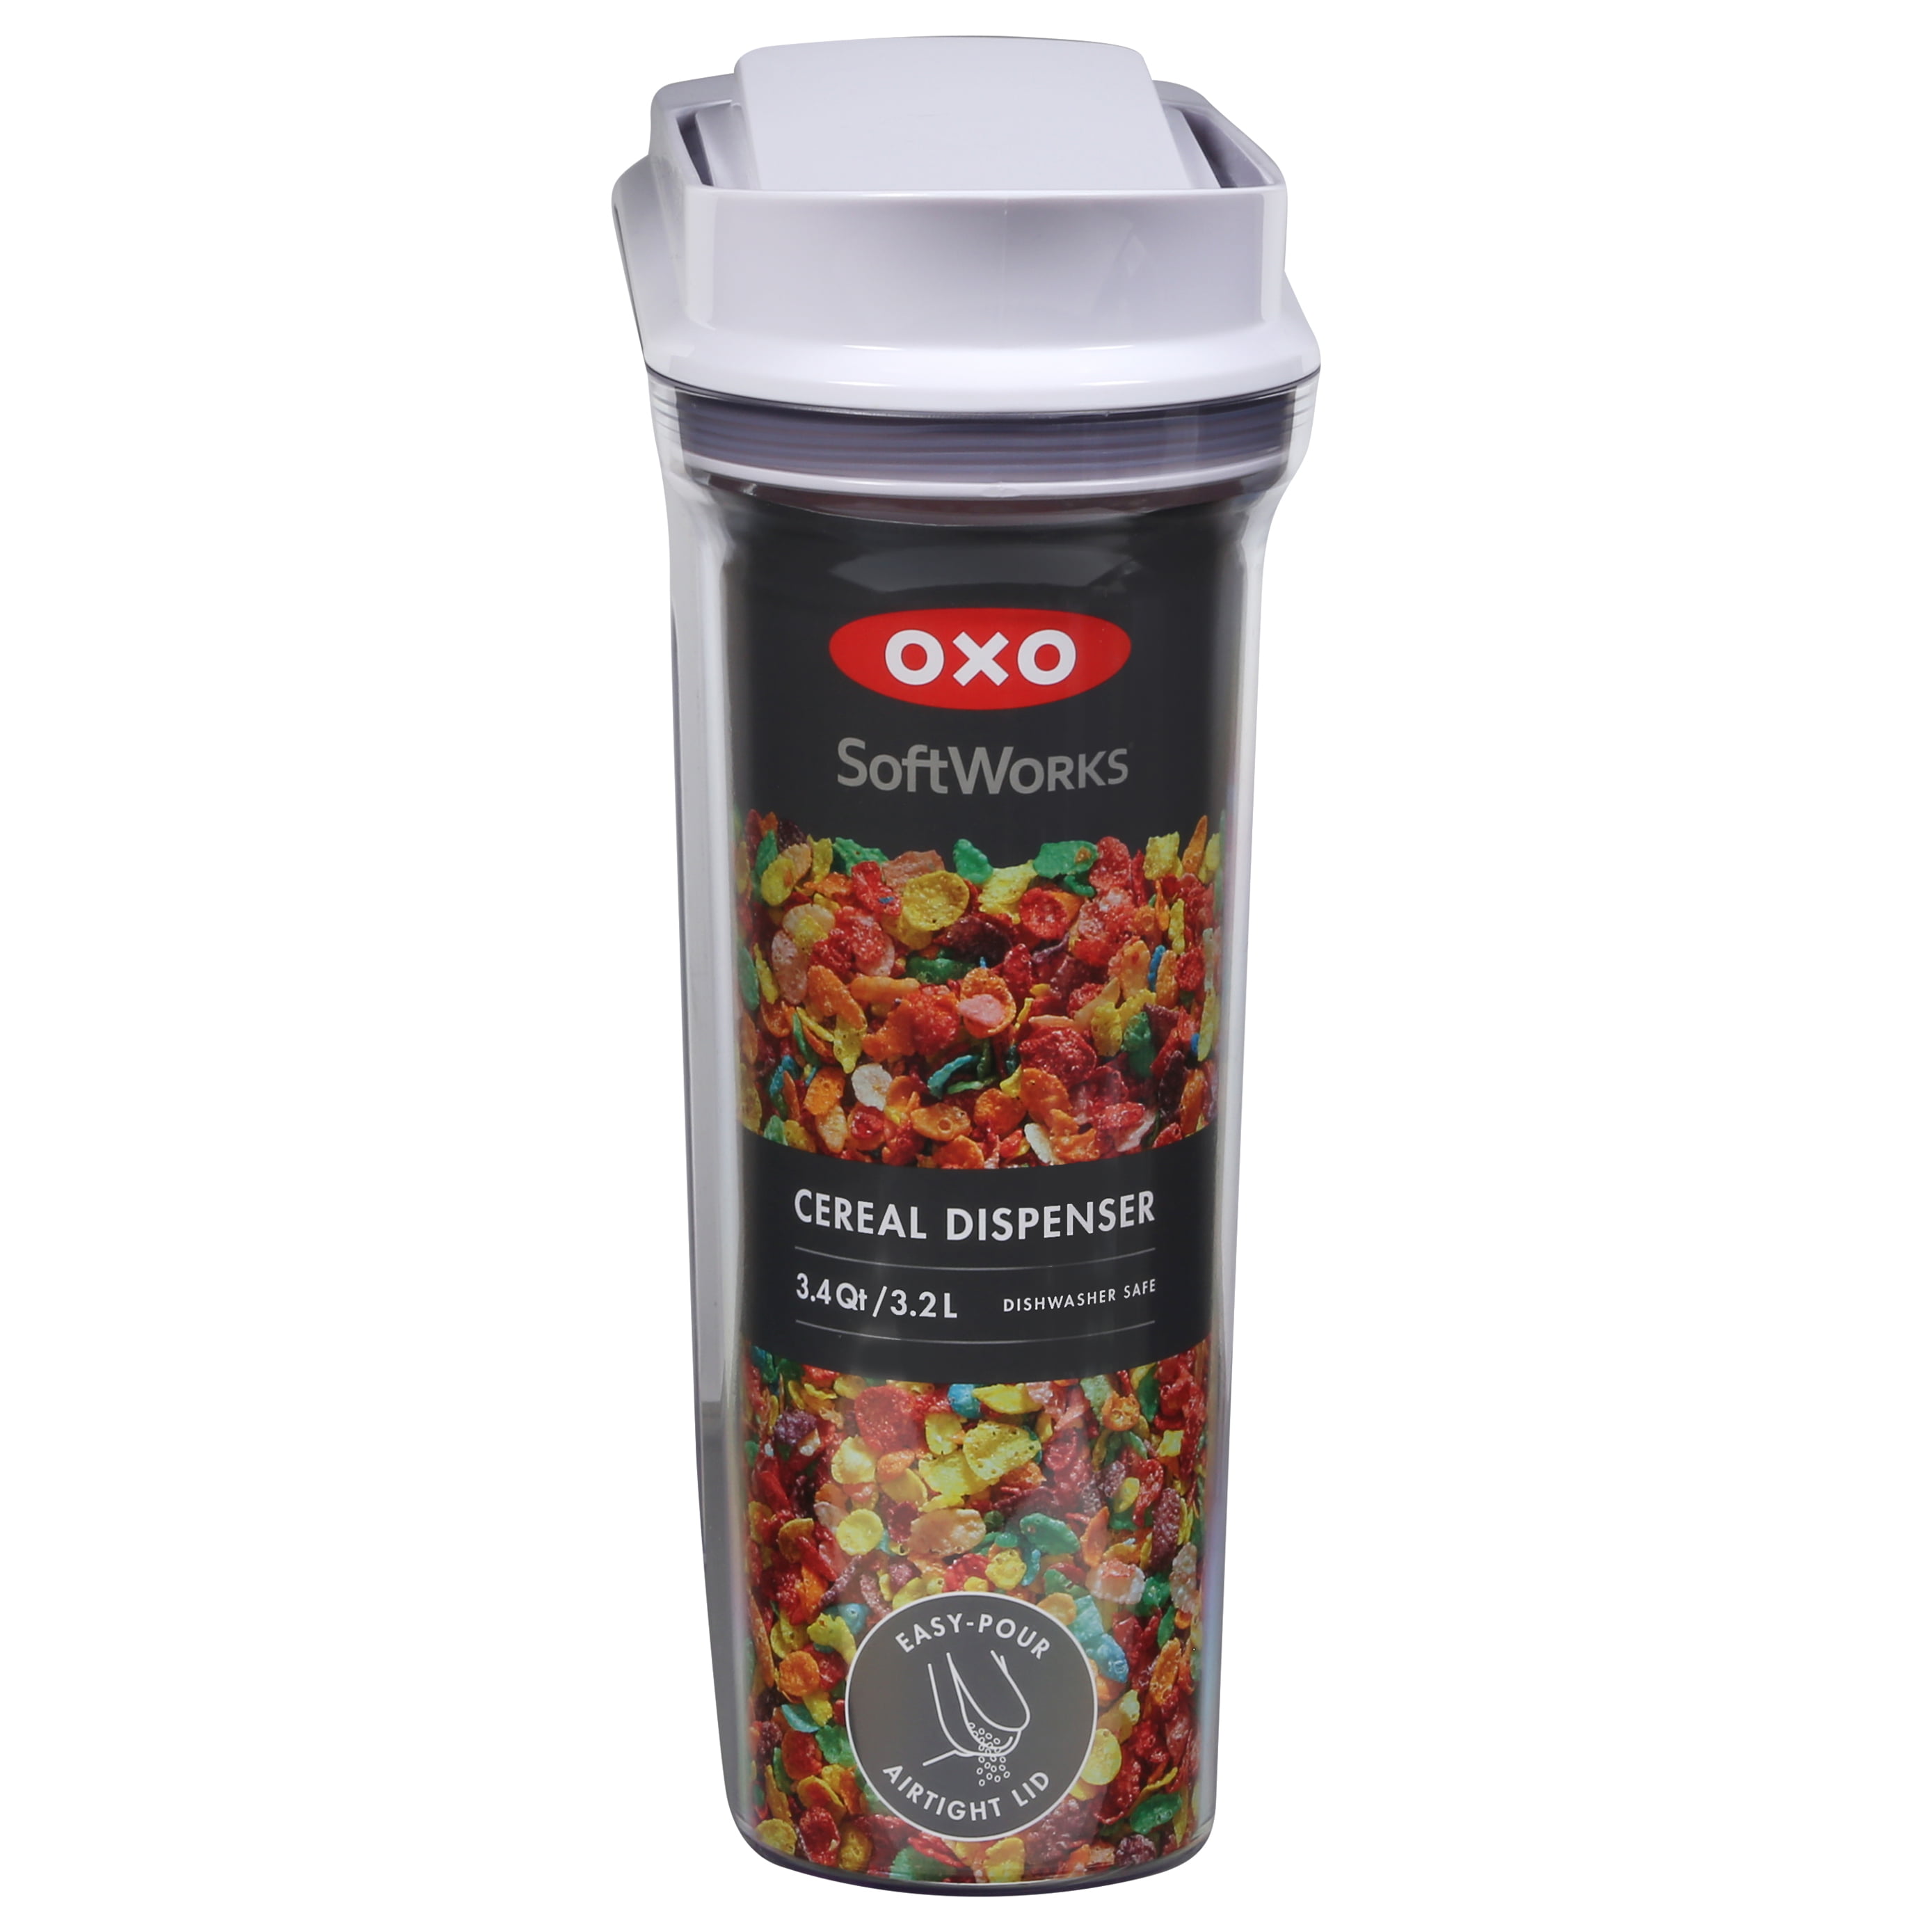 OXO Good Grips 3.4 qt. Medium POP Cereal Dispenser with Airtight Lid  11114000 - The Home Depot